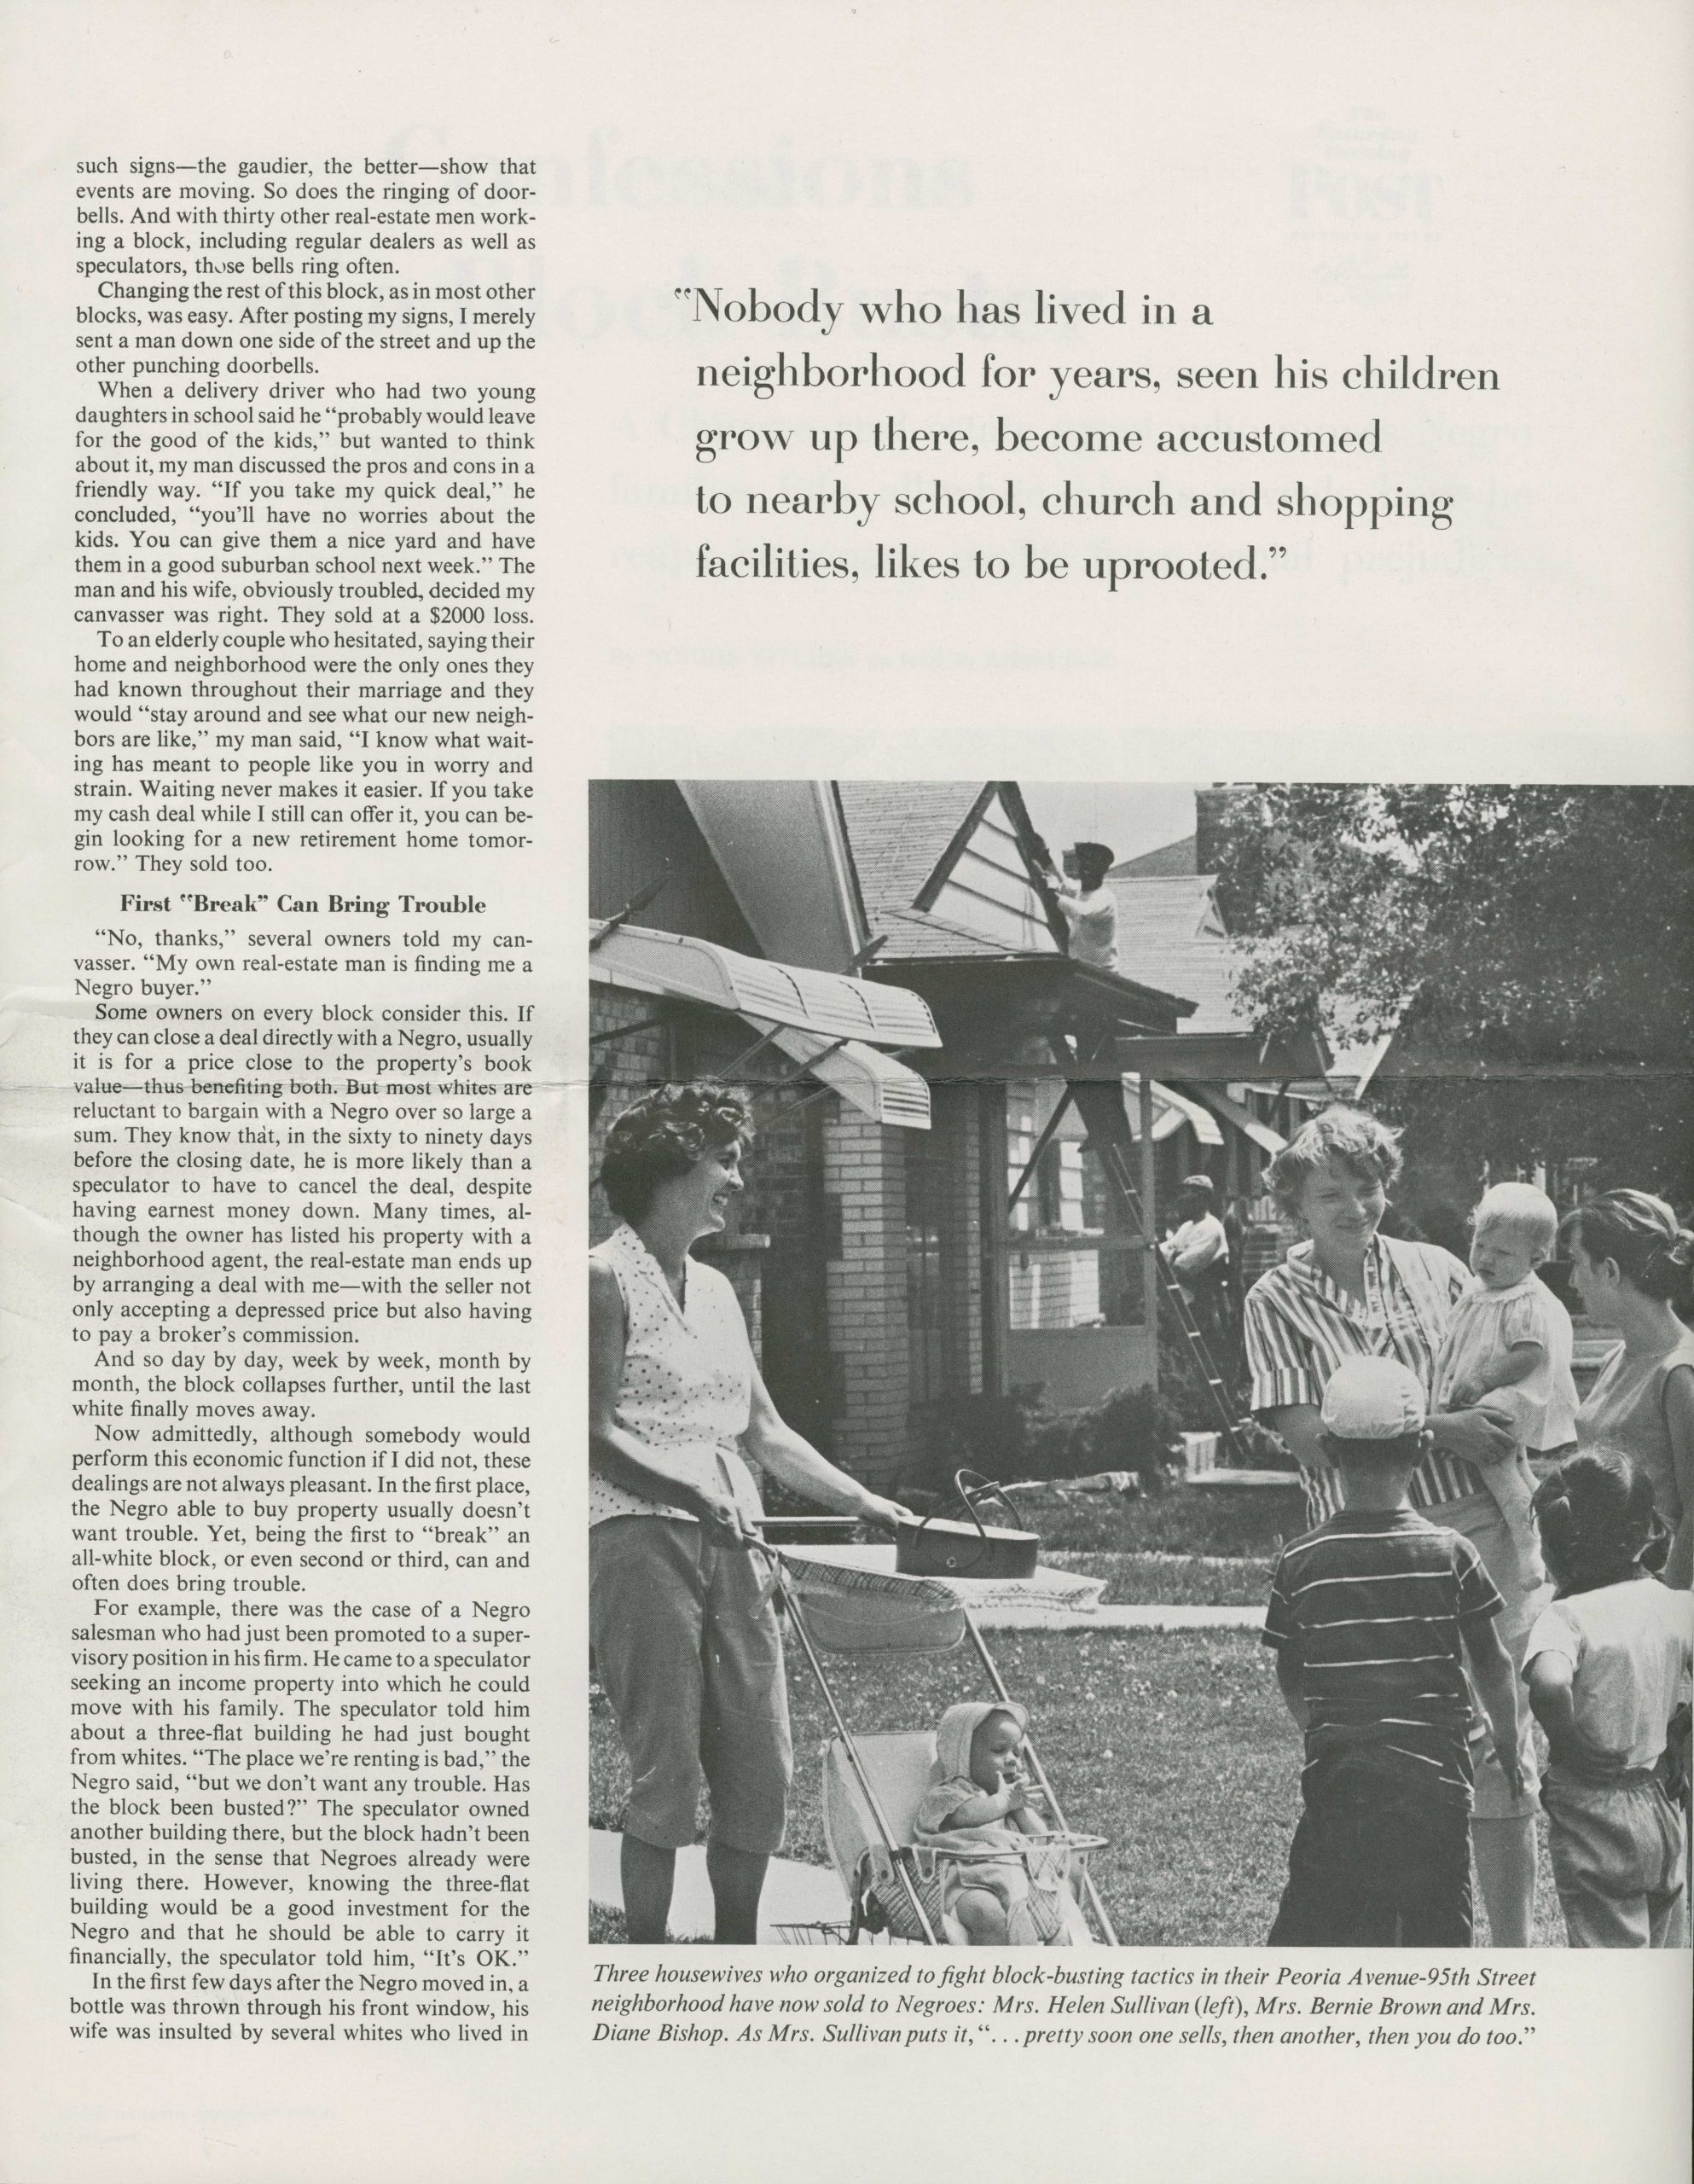 Newspaper page with a black and white photo of three white women with children and infants.